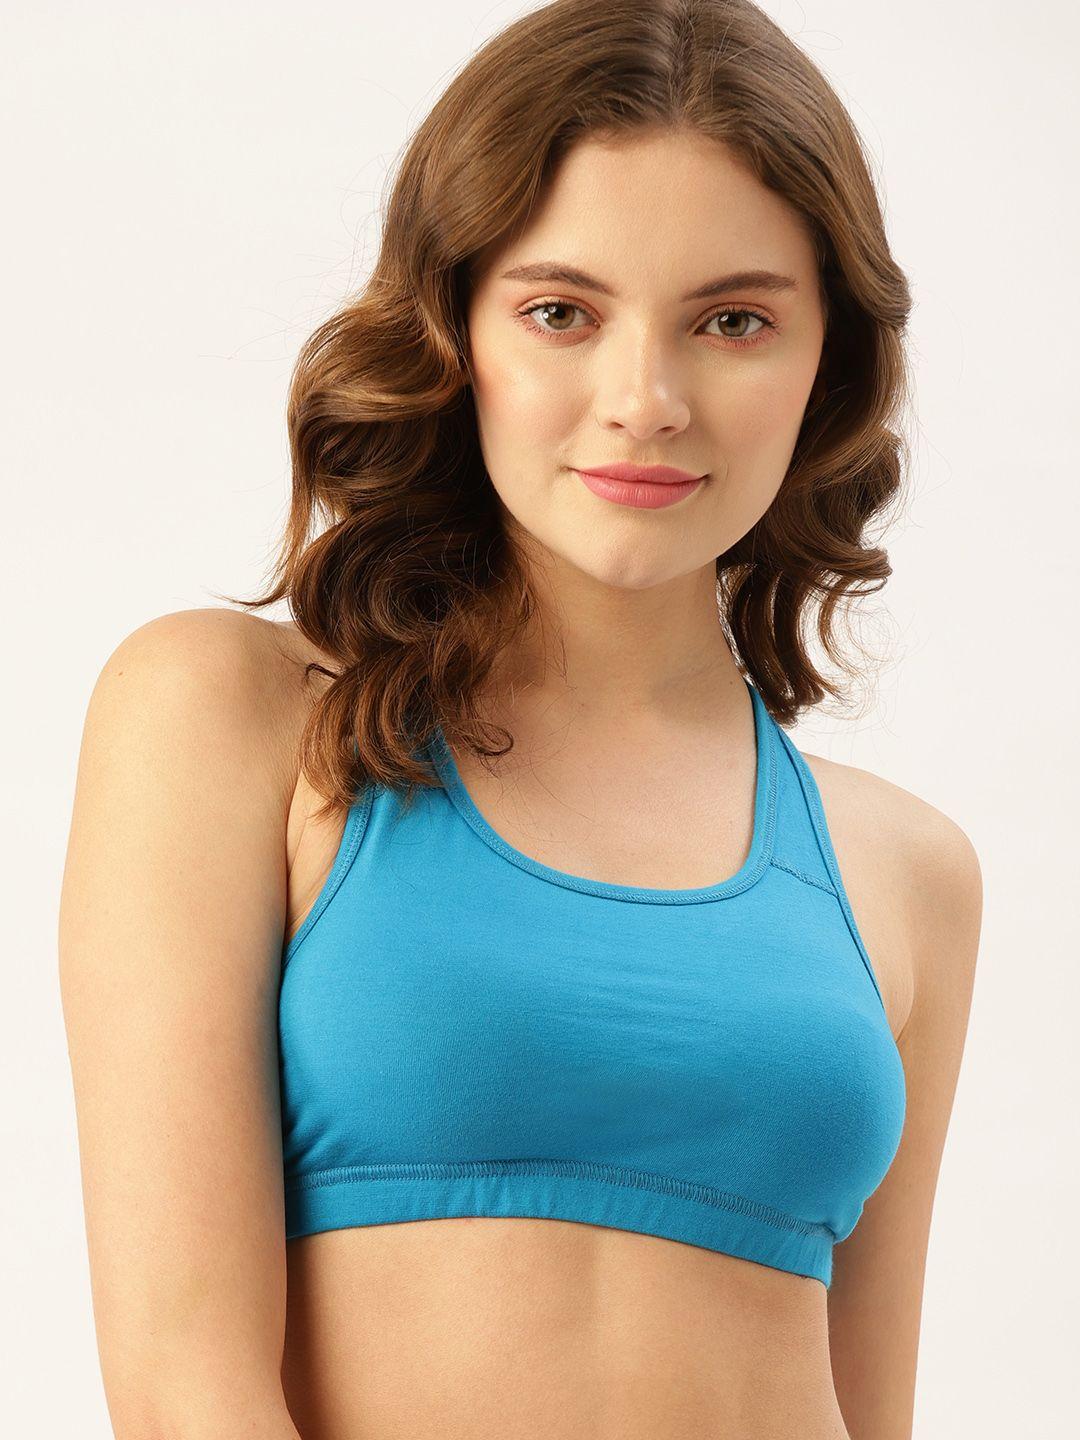 dressberry-blue-sports-bra-non-wired-non-padded